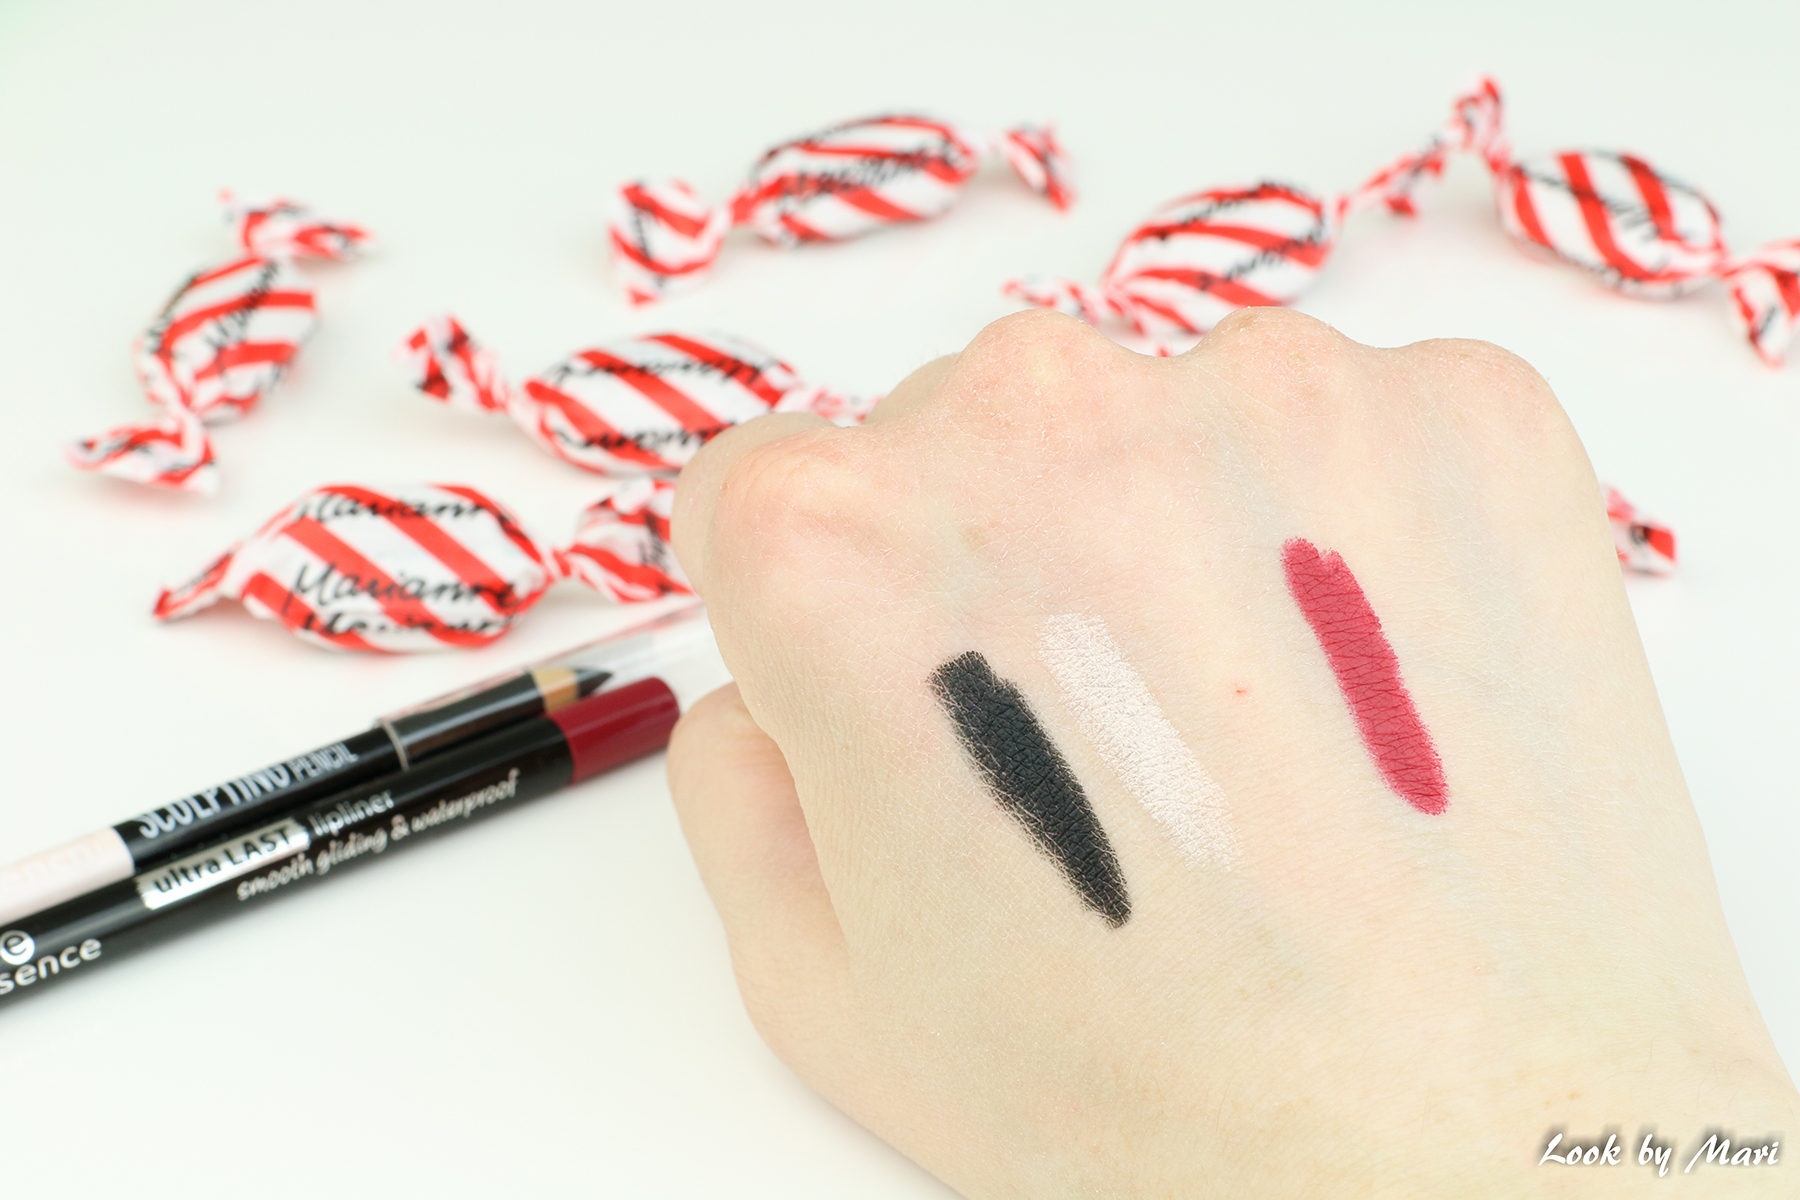 12 essence sculpting eye pencil black & white swatches swatch review kokemuksia